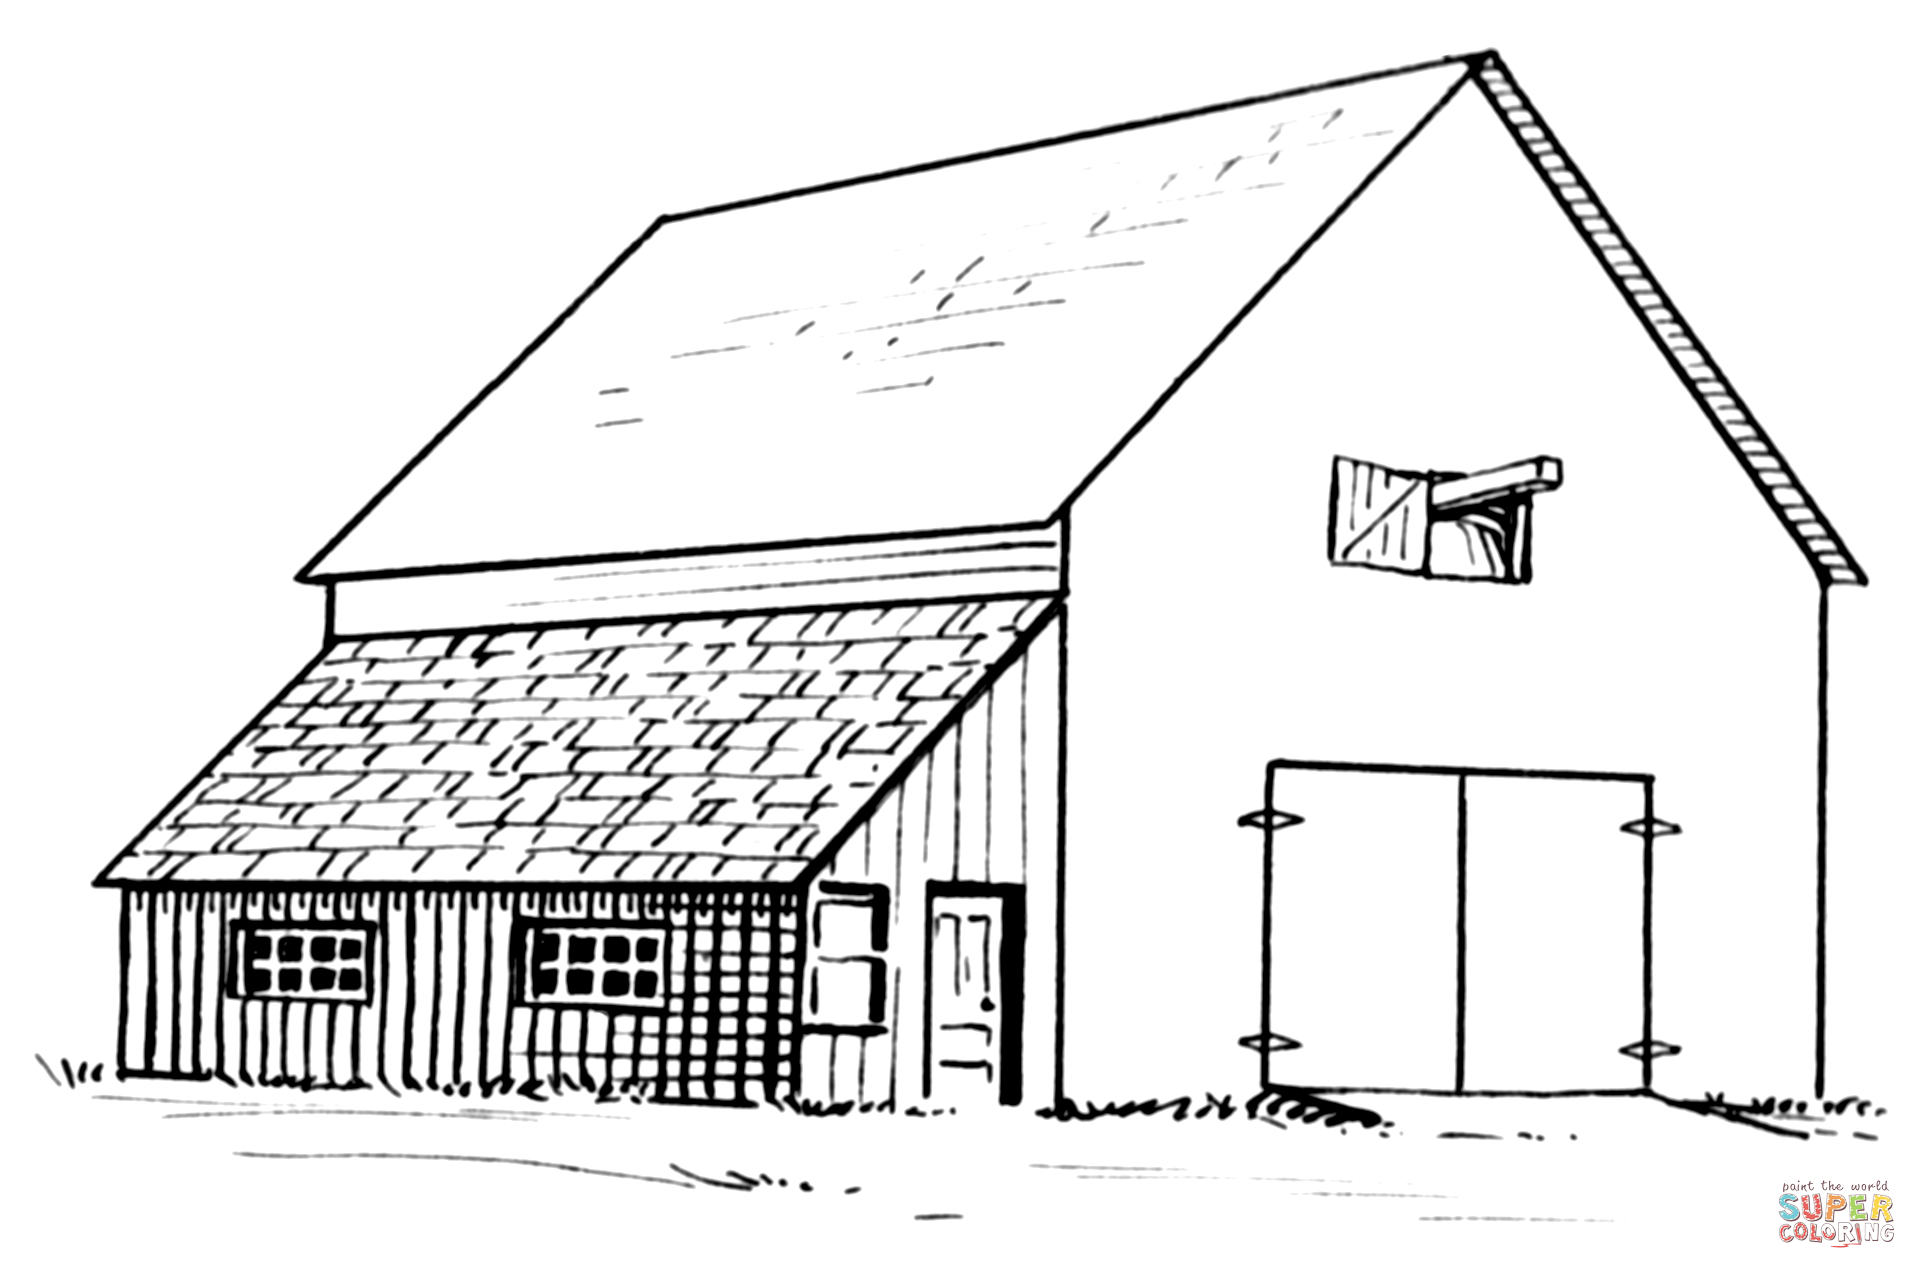 Barn And Lean-To Coloring Page | Free Printable Coloring Pages - Free Printable Barn Coloring Pages